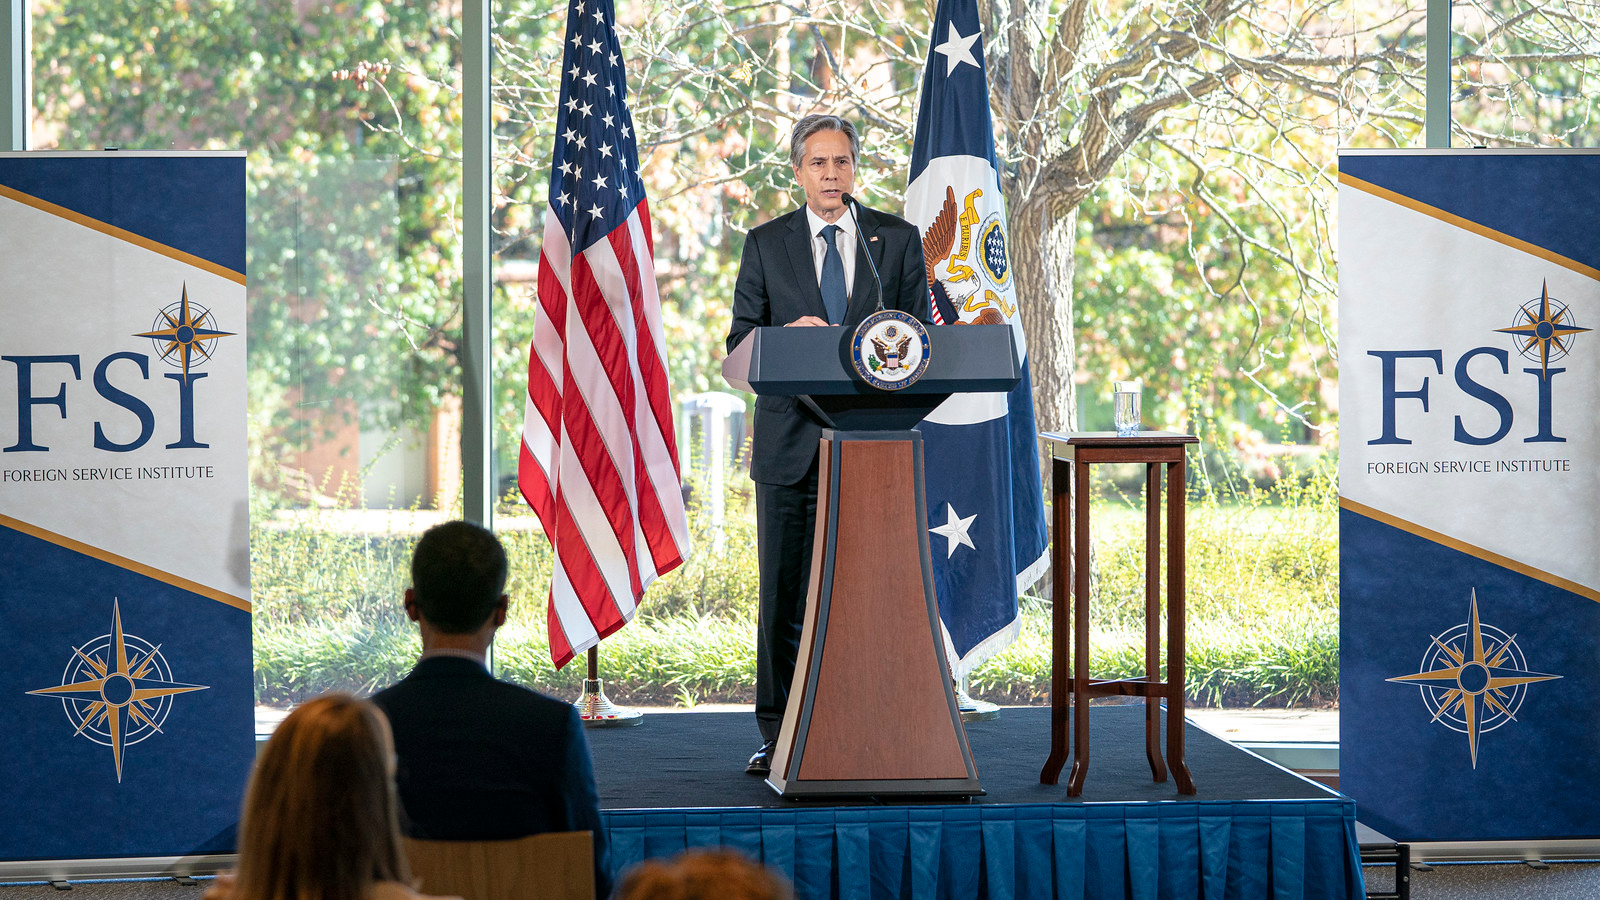 Secretary of State Antony J. Blinken delivers remarks on Modernizing American Diplomacy at the Foreign Service Institute in Arlington, Virginia, on October 27, 2021. [State Department photo by Freddie Everett/ Public Domain]